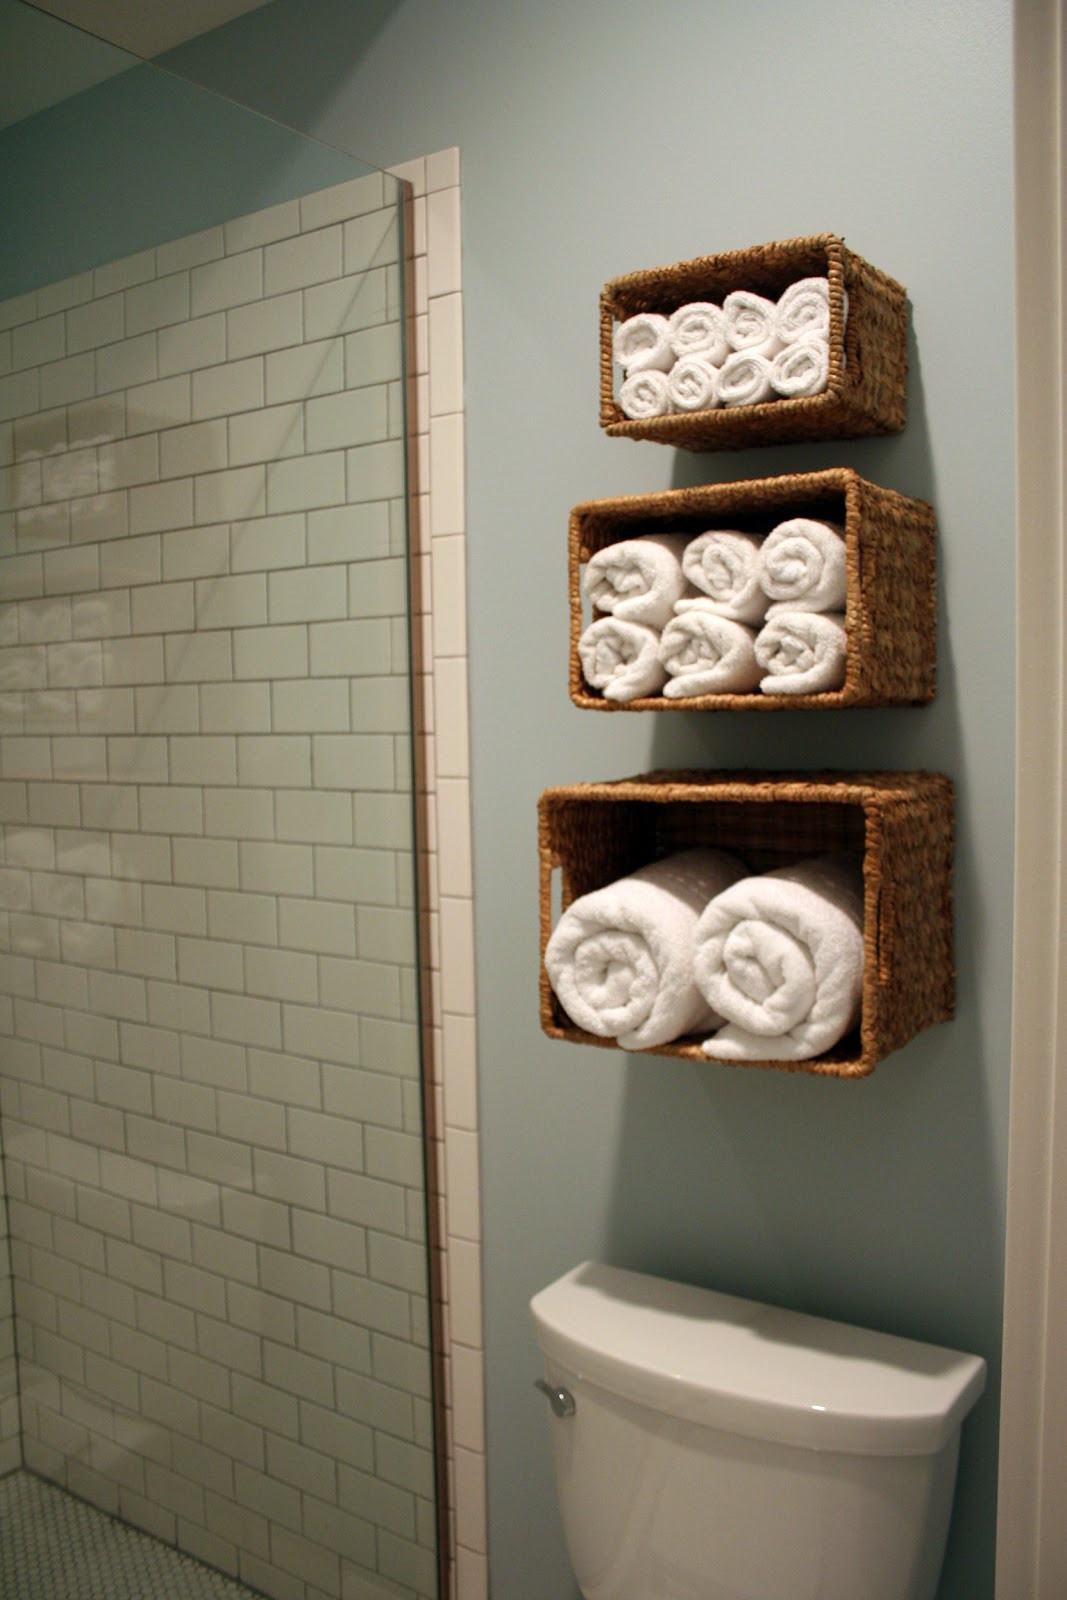 Three wicker baskets on the wall full of white towels